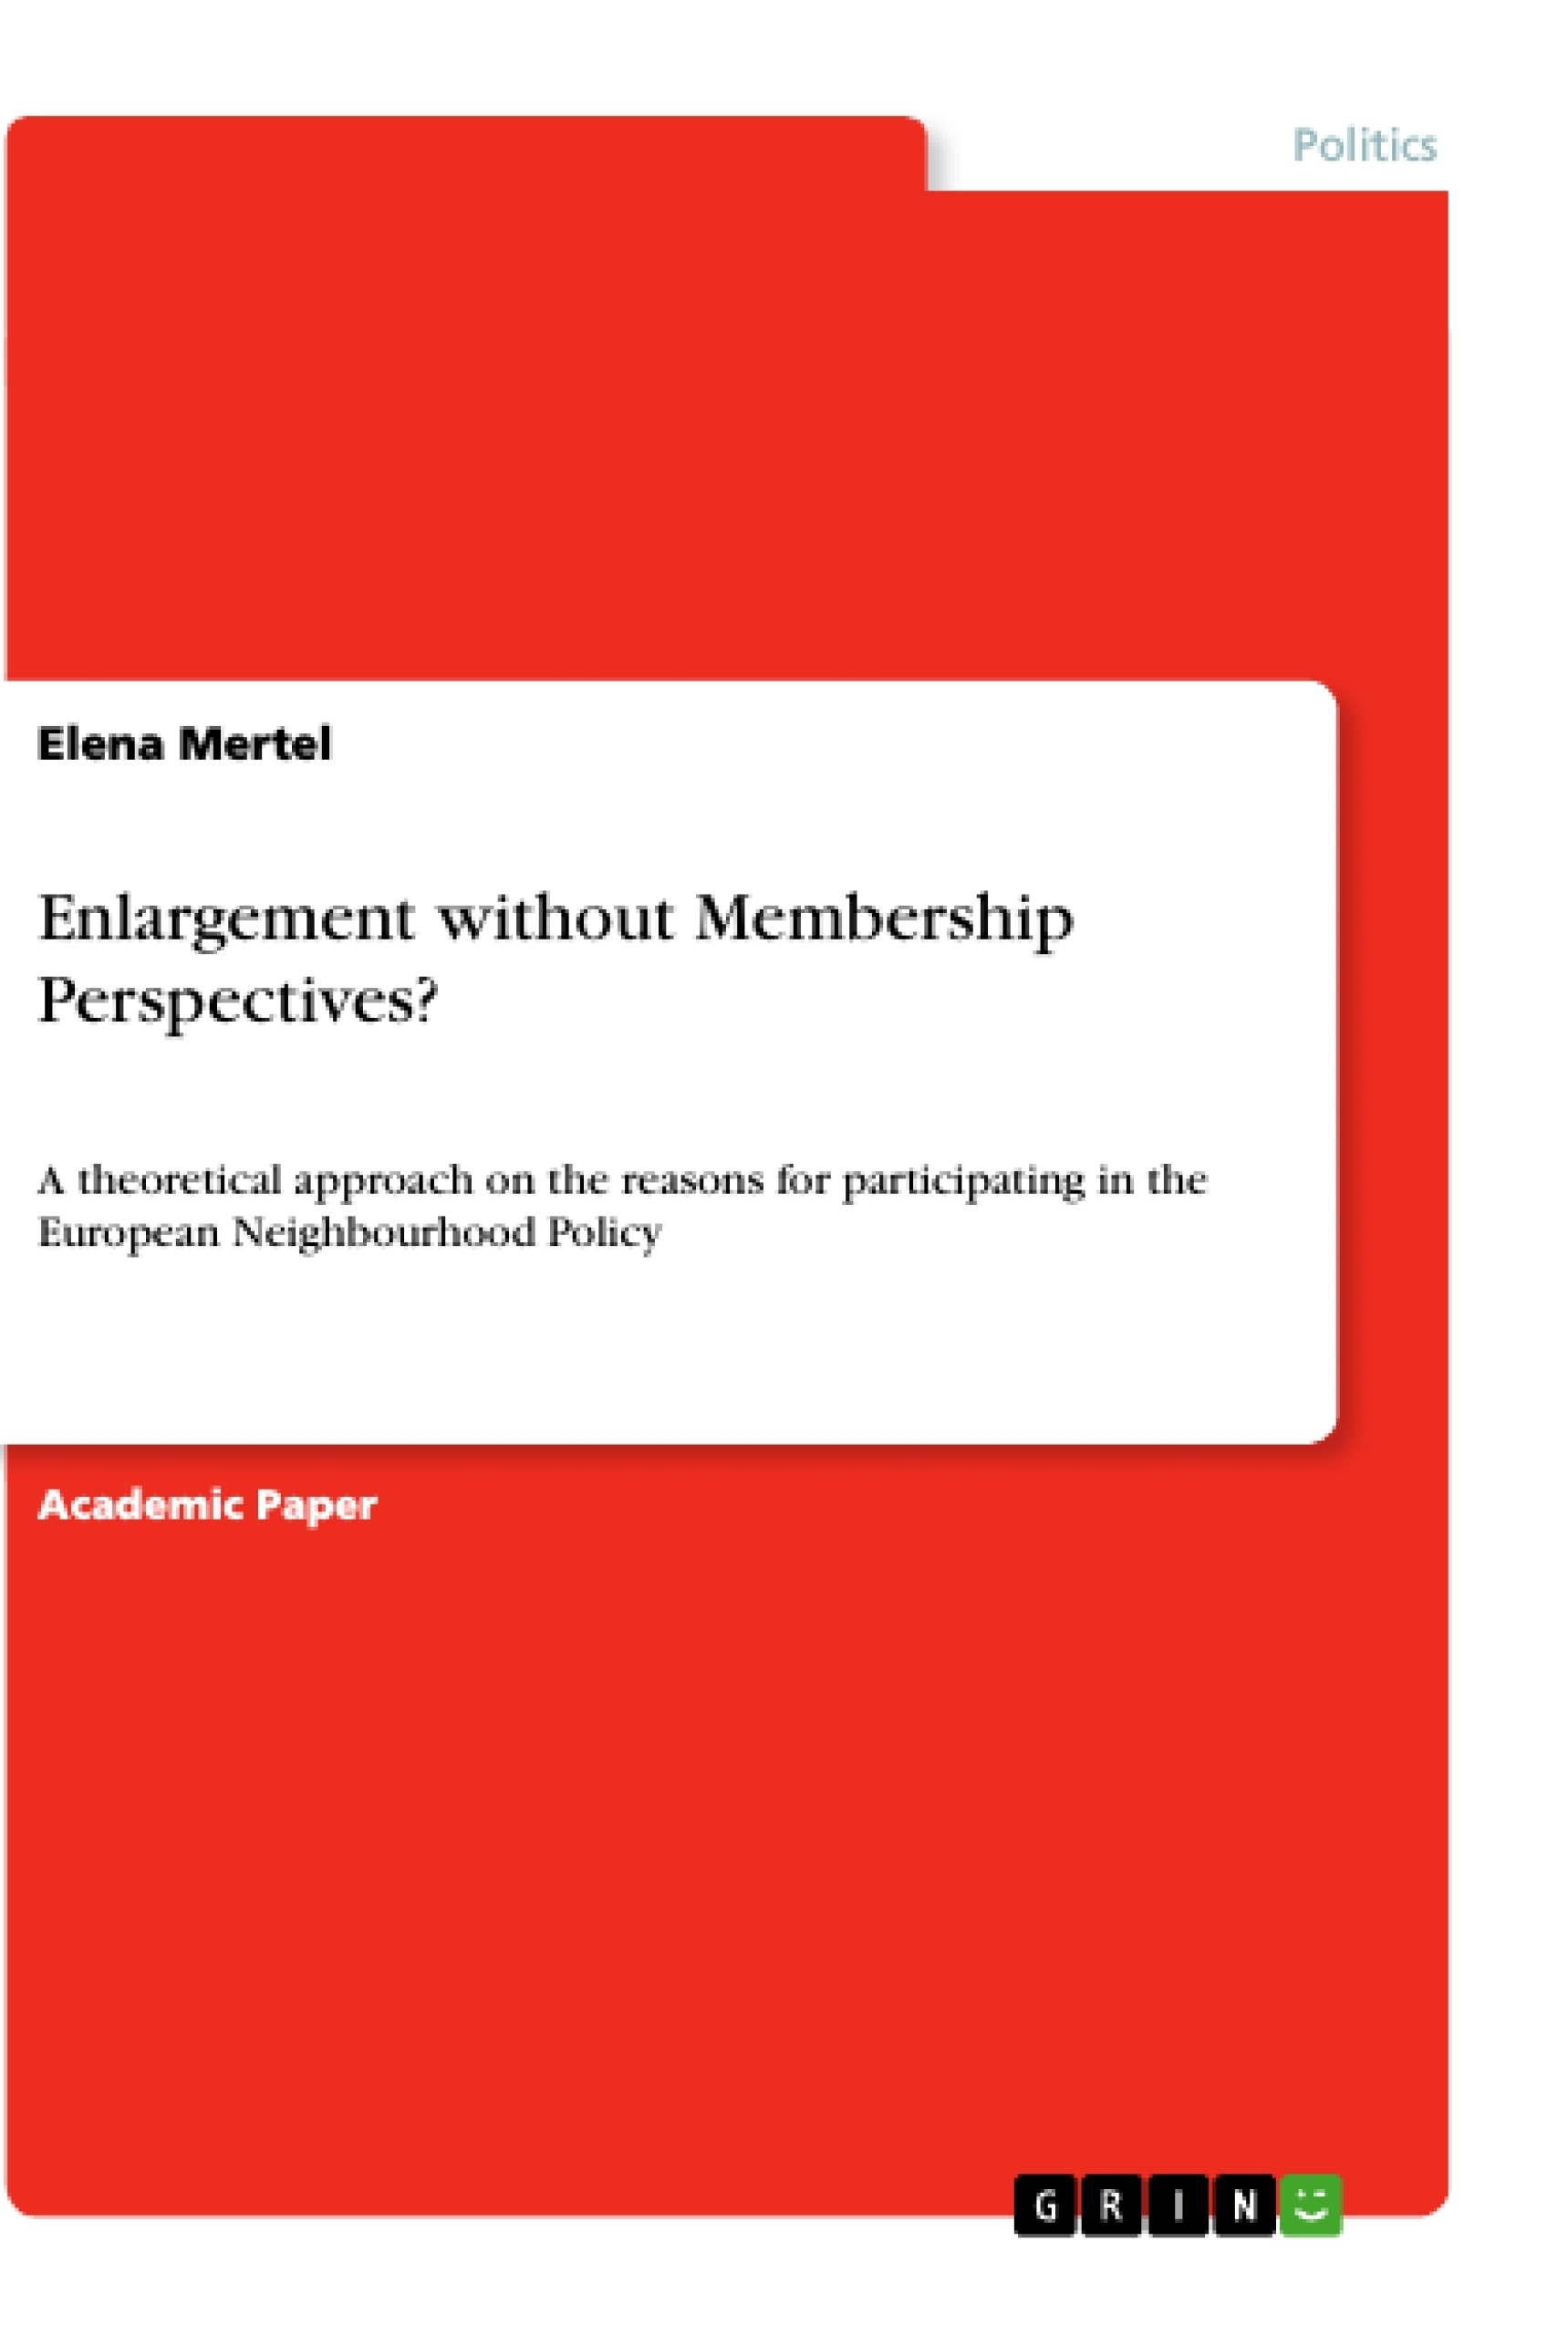 Title: Enlargement without Membership Perspectives?